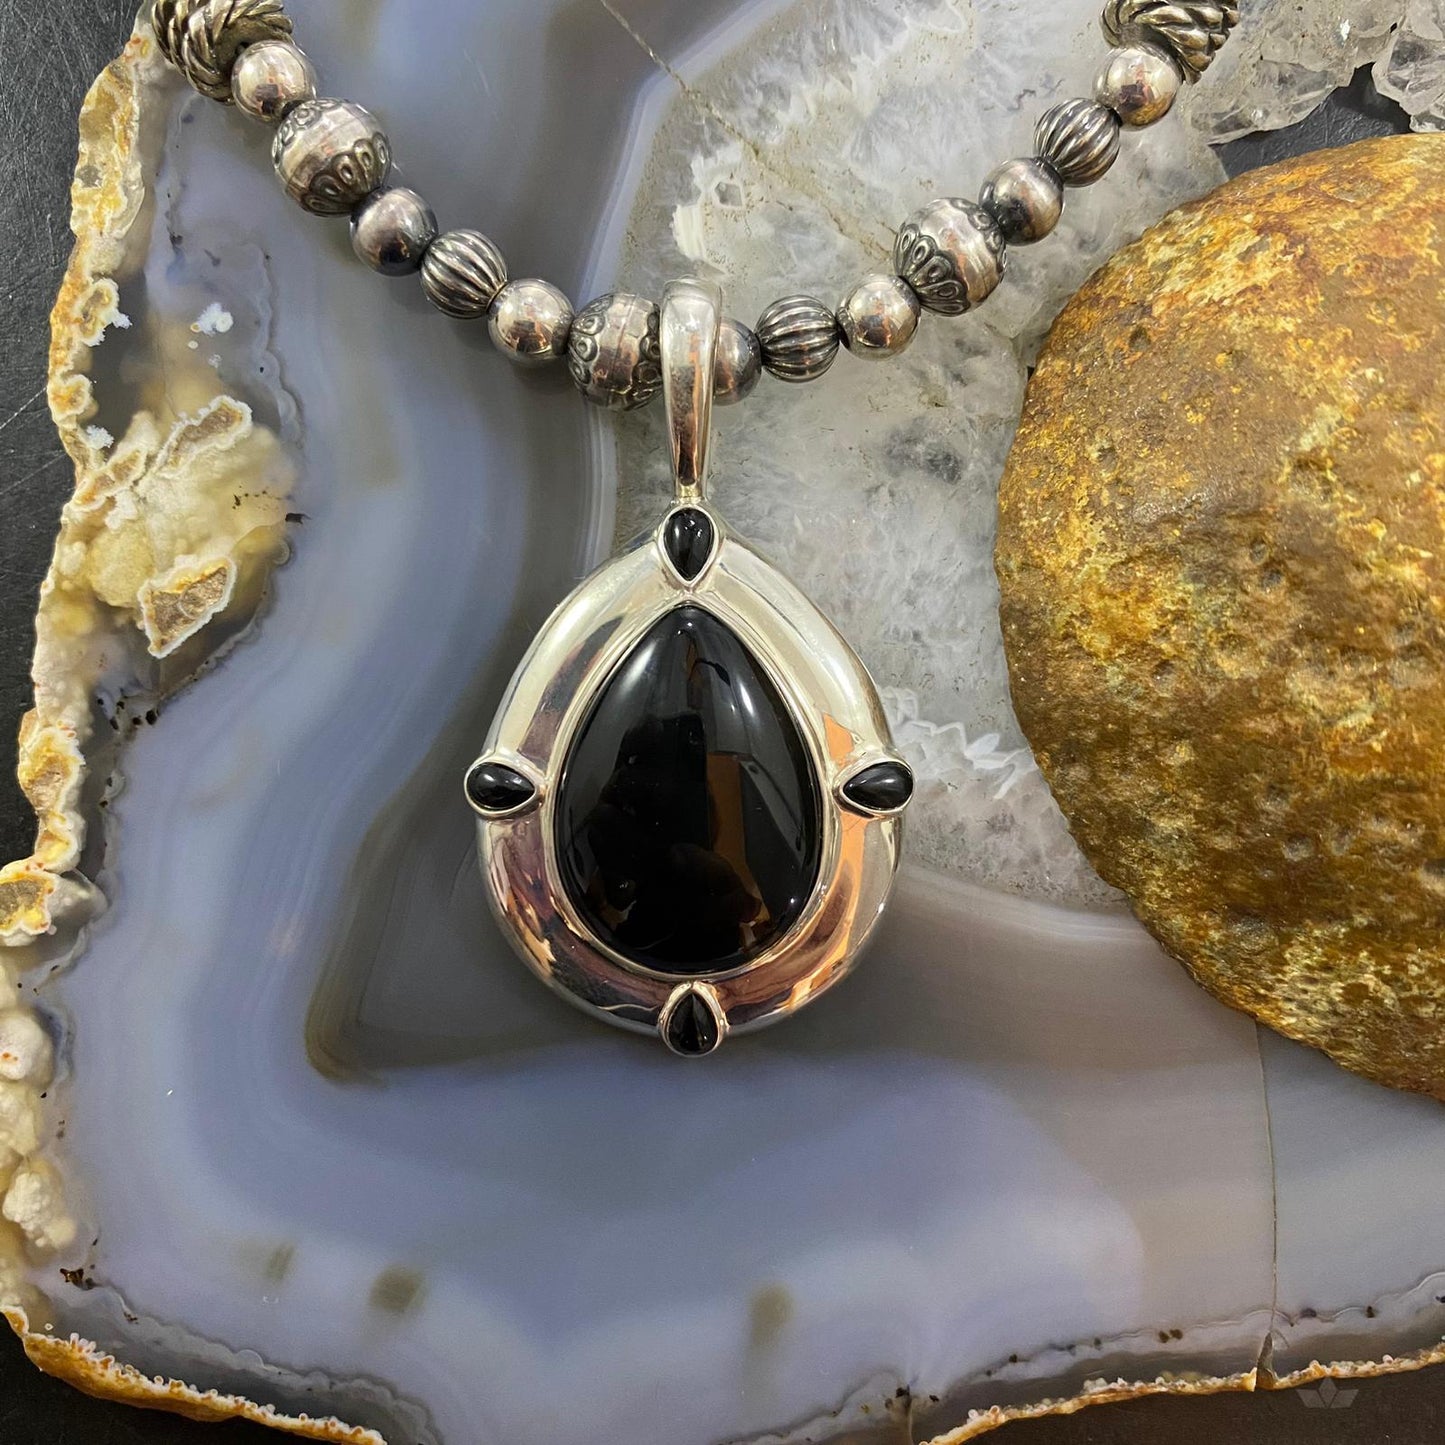 Carolyn Pollack Southwestern Style Sterling Silver Black Onyx Decorated Enhancer Pendant For Women